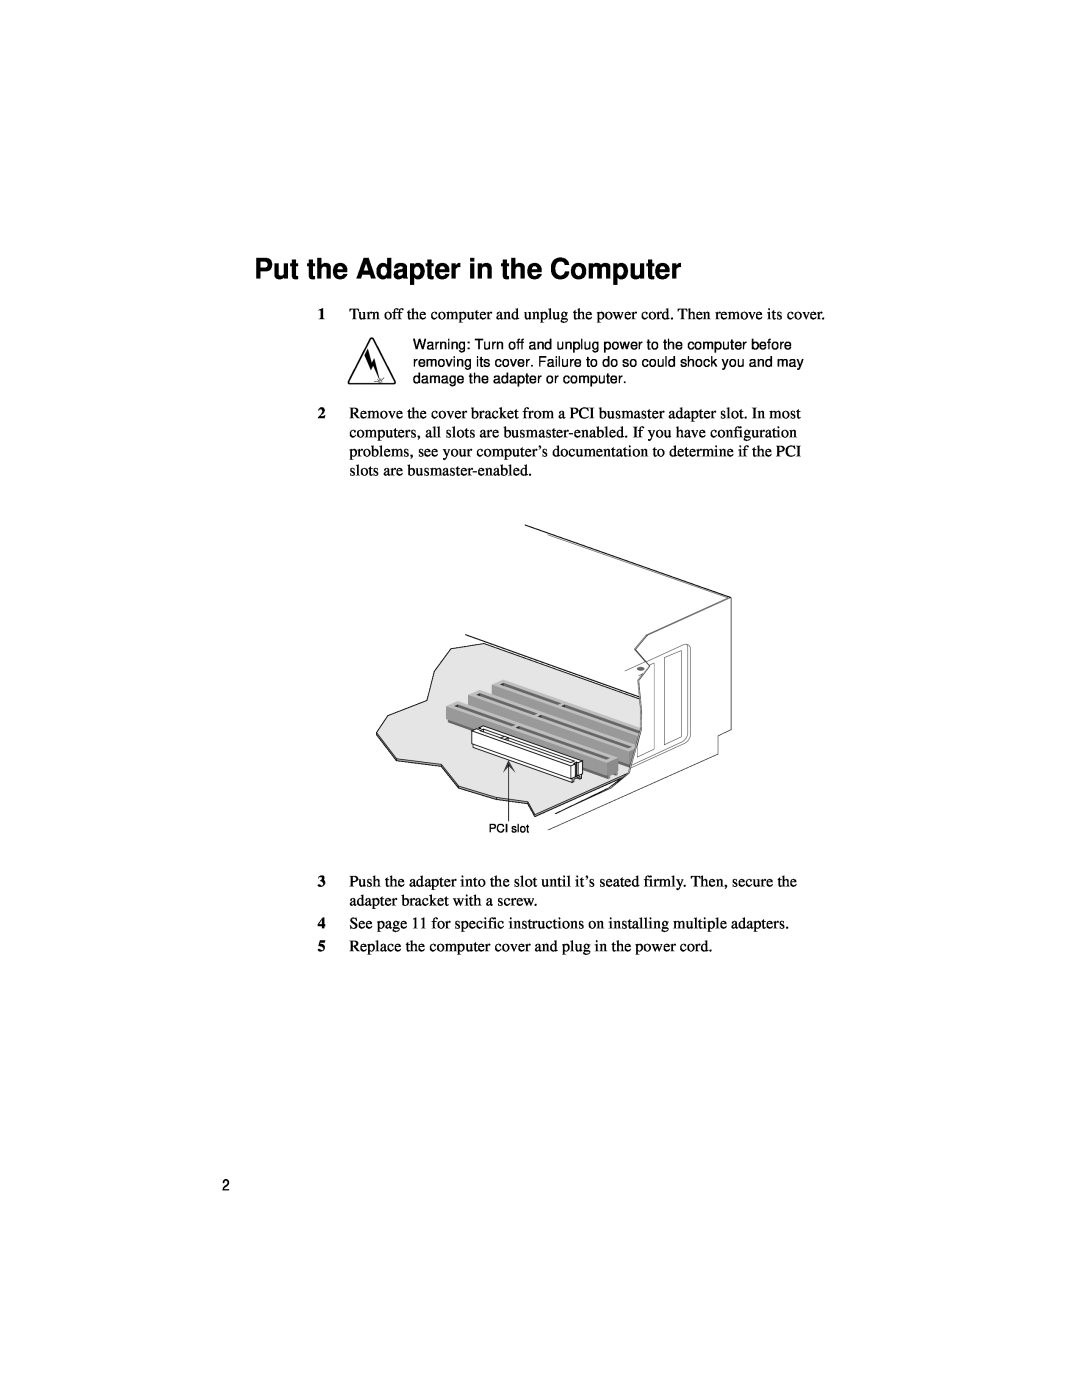 Intel PRO/100 TX PCI manual Put the Adapter in the Computer 